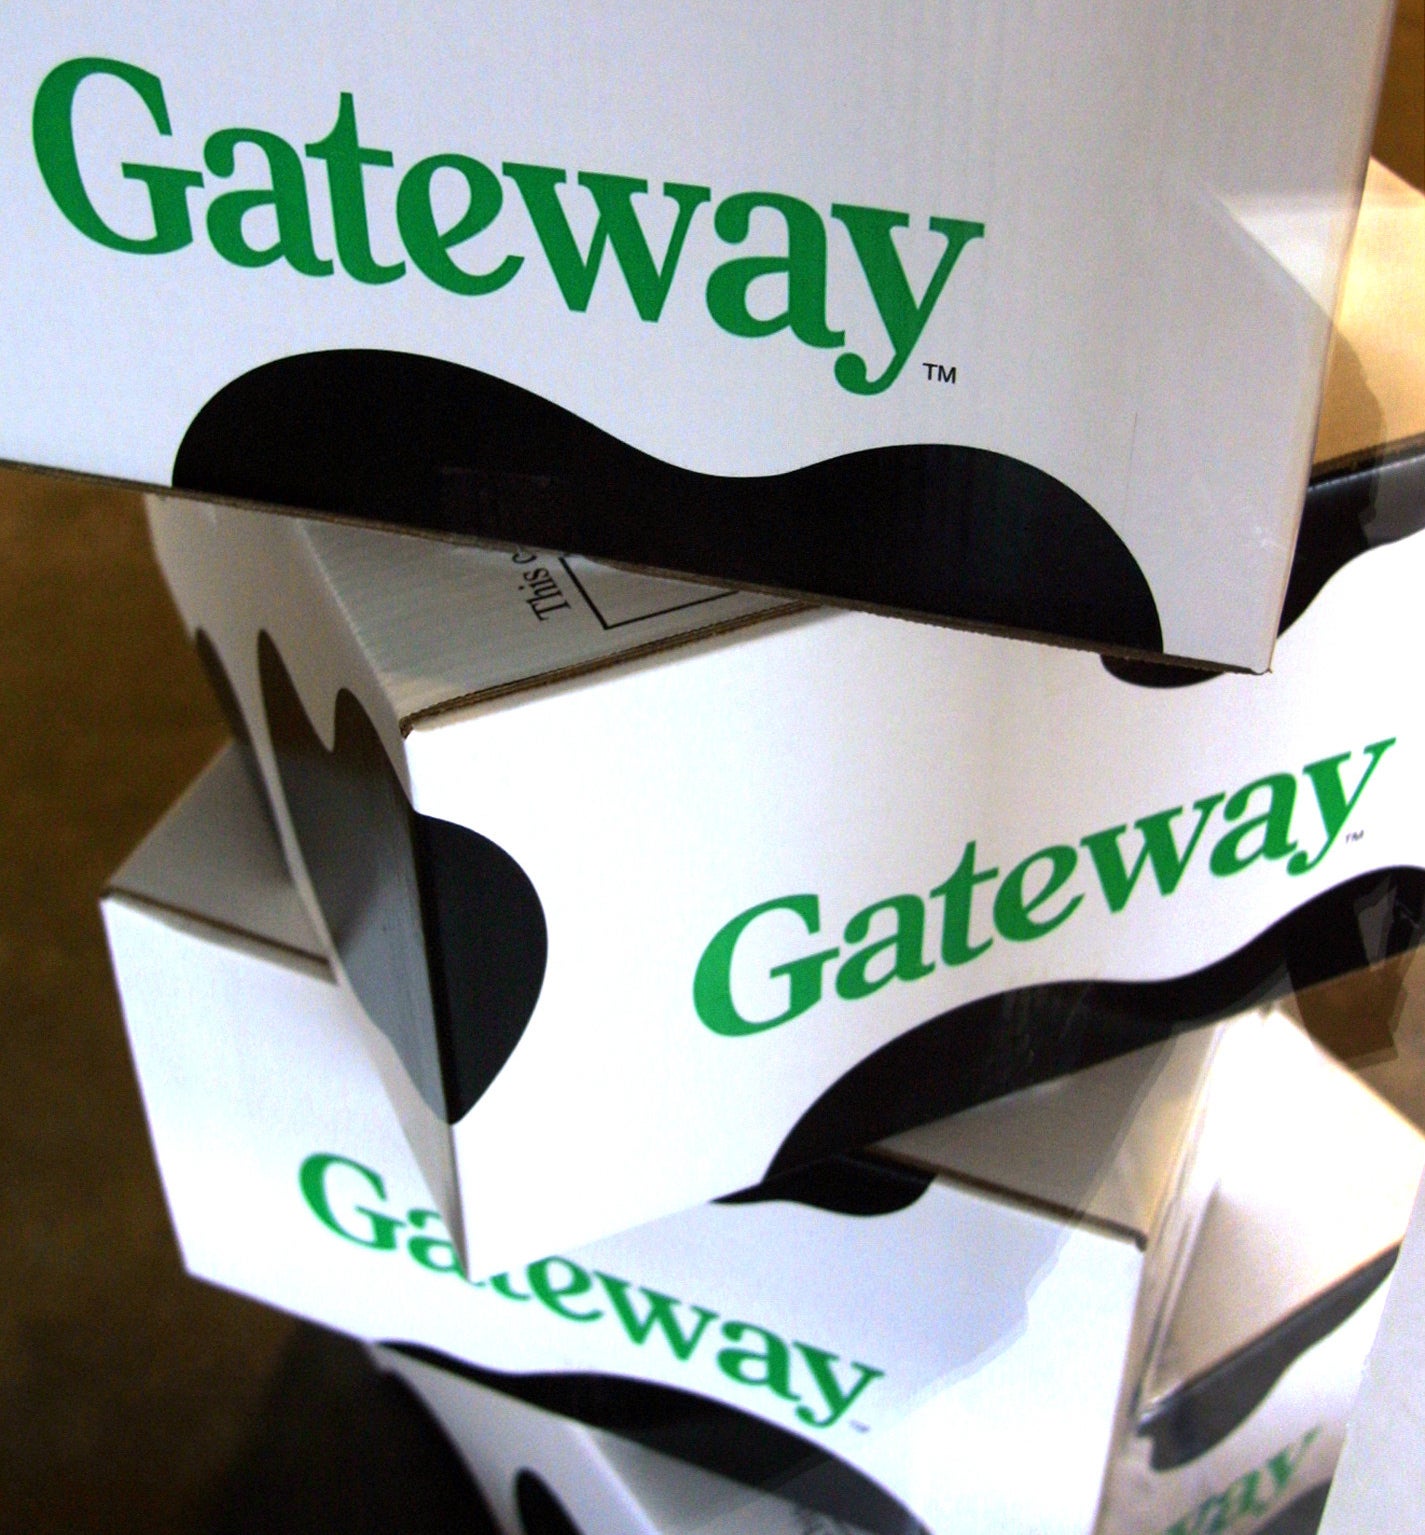 A stack of Gateway computer boxes with cow-print on them